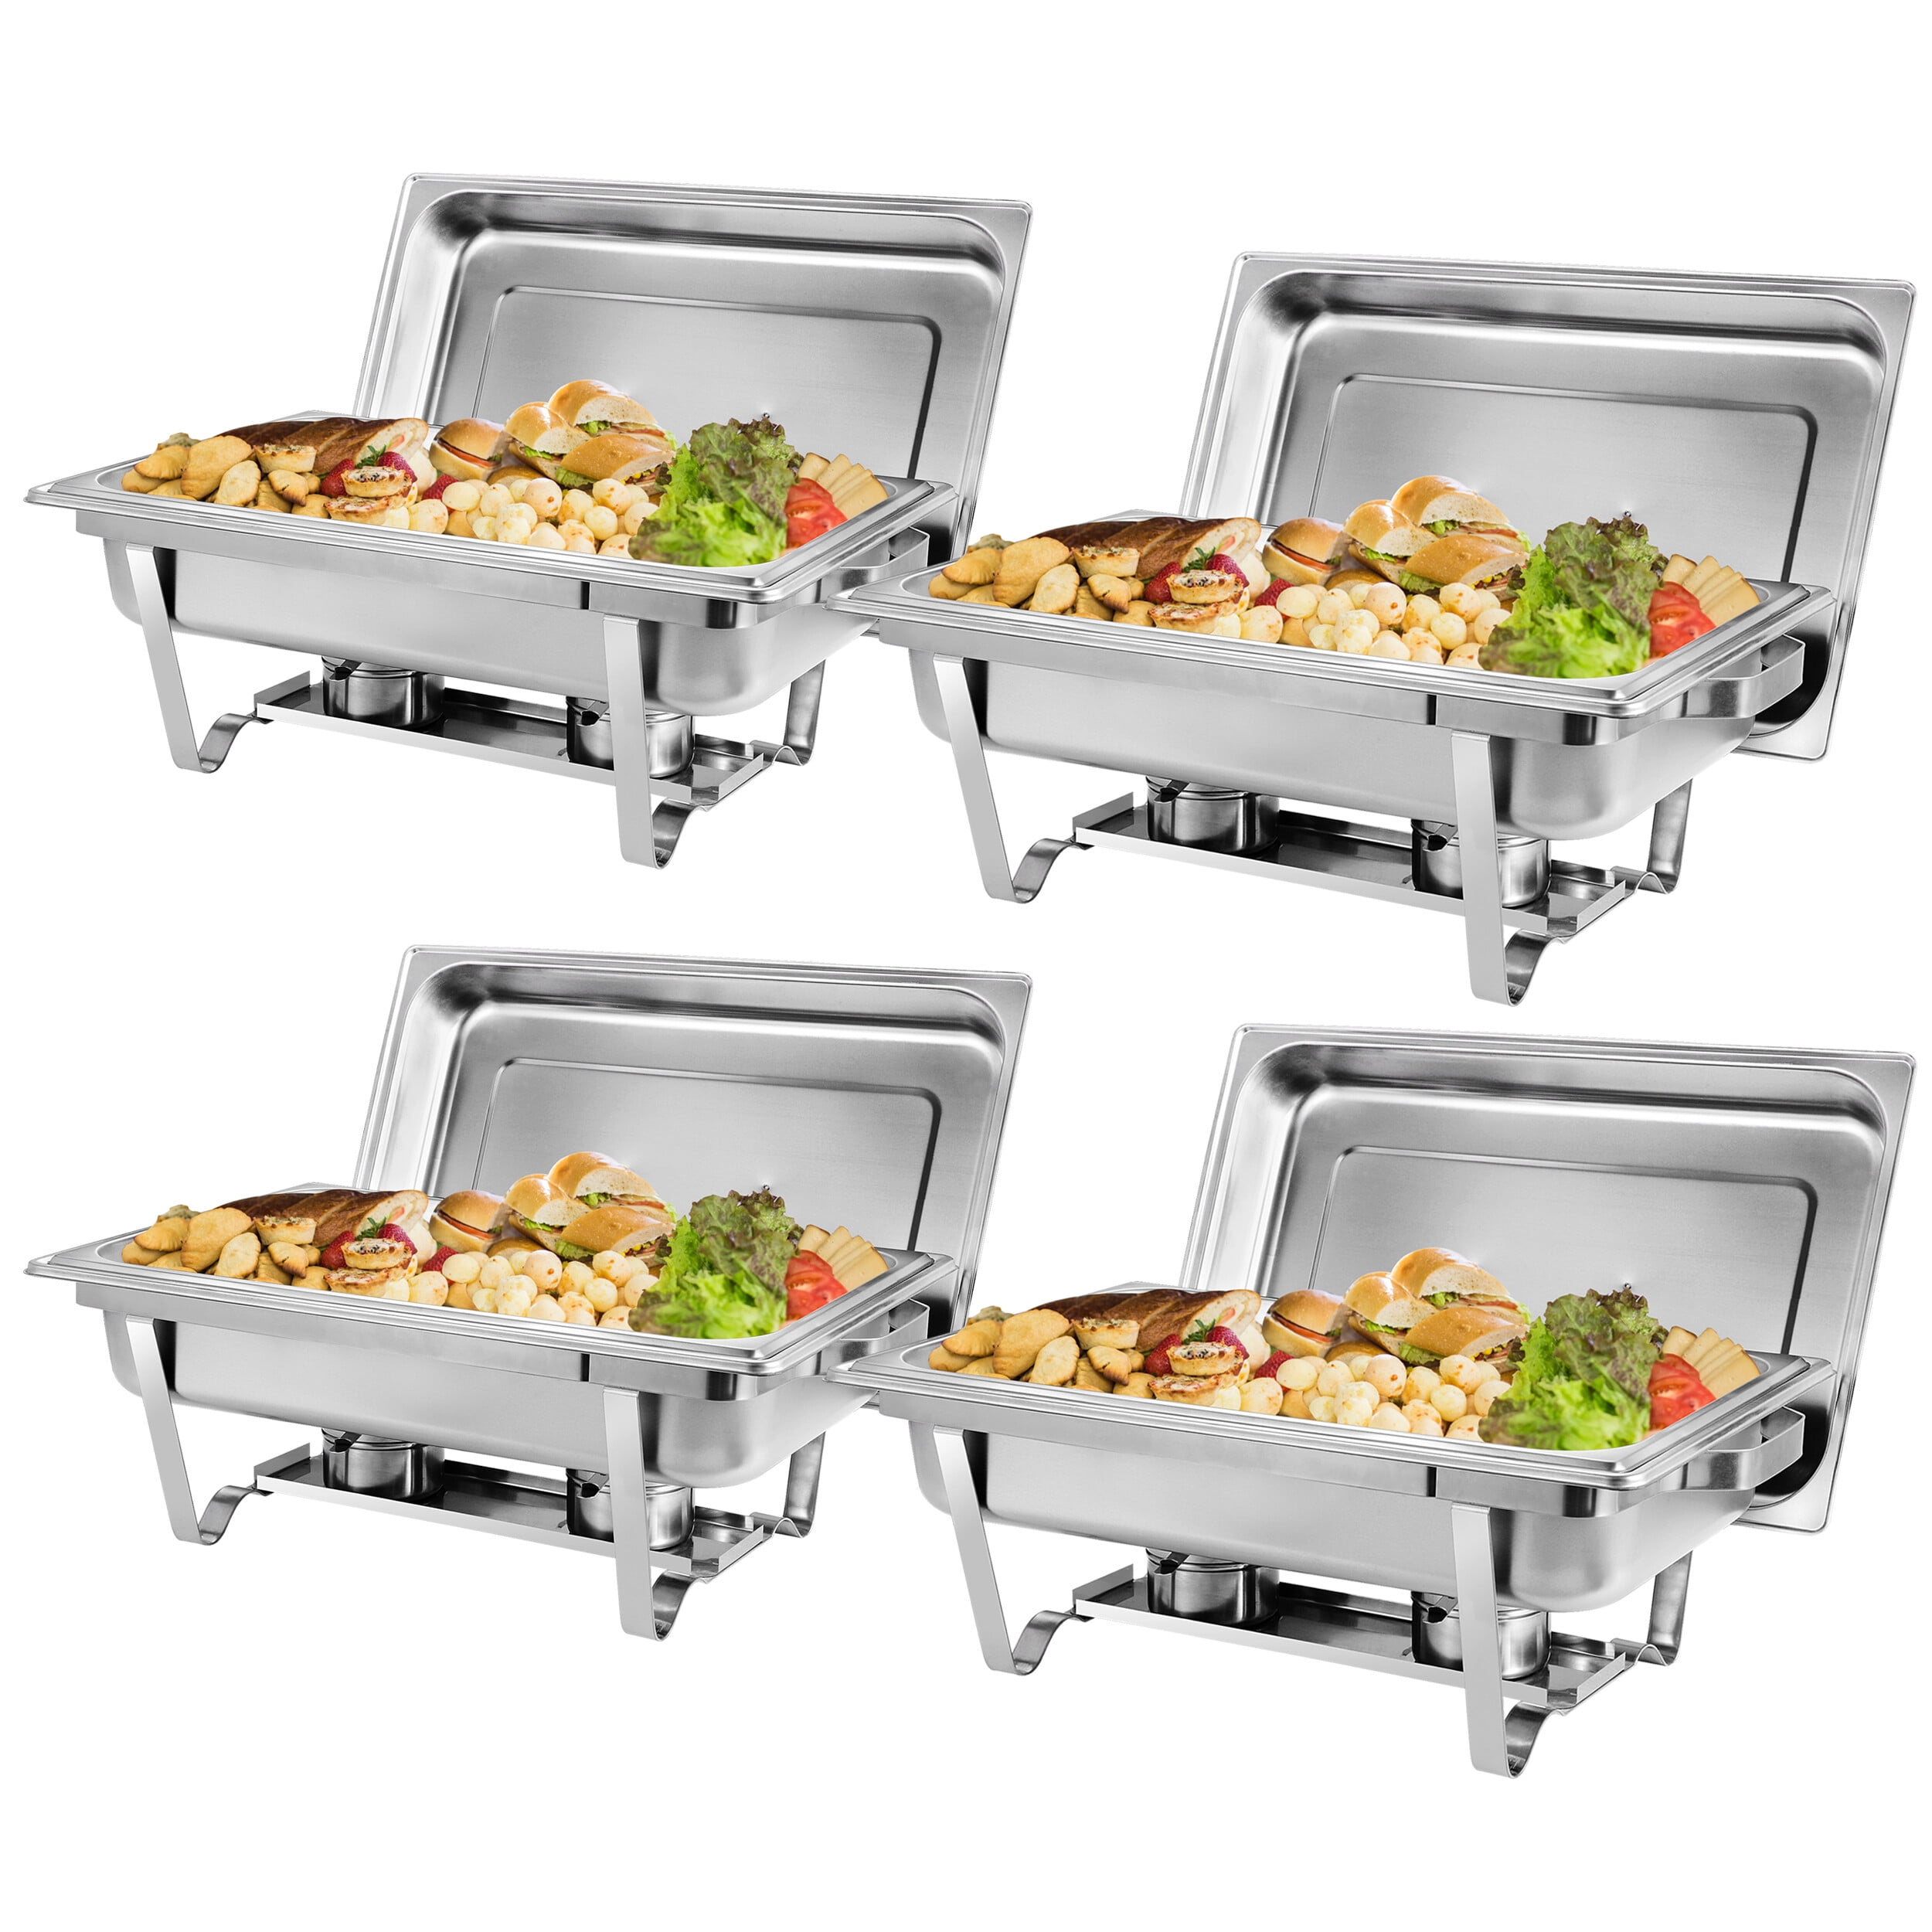 Ufurpie 4 Pack 8 QT Stainless Steel Chafing Dish Buffet Set,Chafers and Buffet  Warmers Sets,Foldable Chafing Dishes,Buffet Servers and Warmers,Food Warmers  